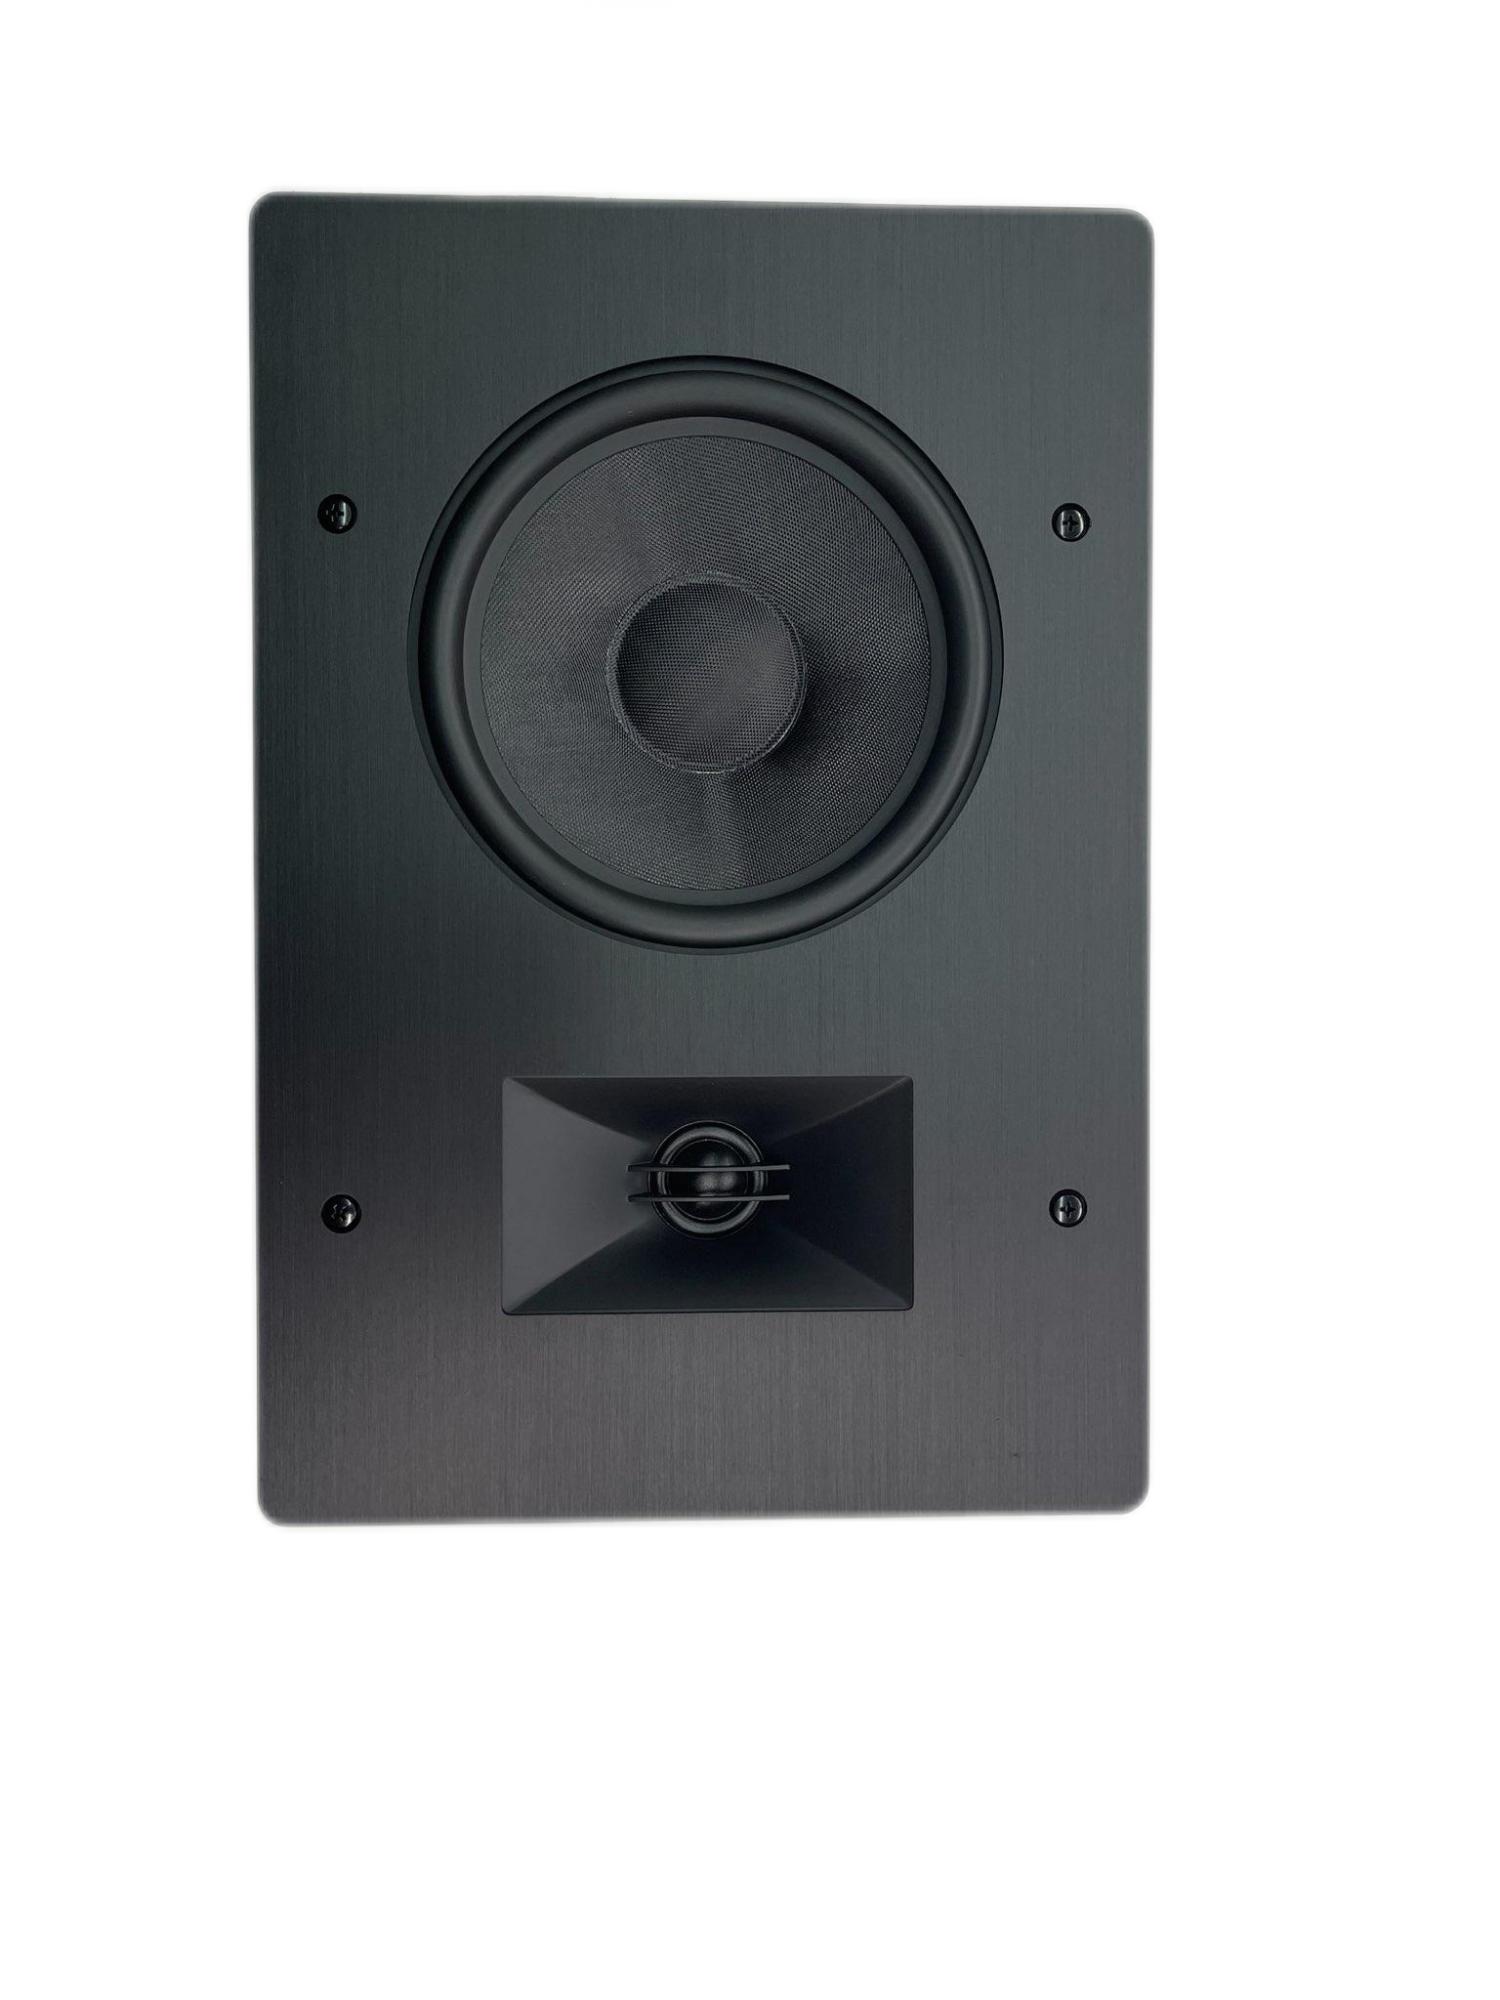 8 inch in-wall on-wall speaker for home theater surround sound system 